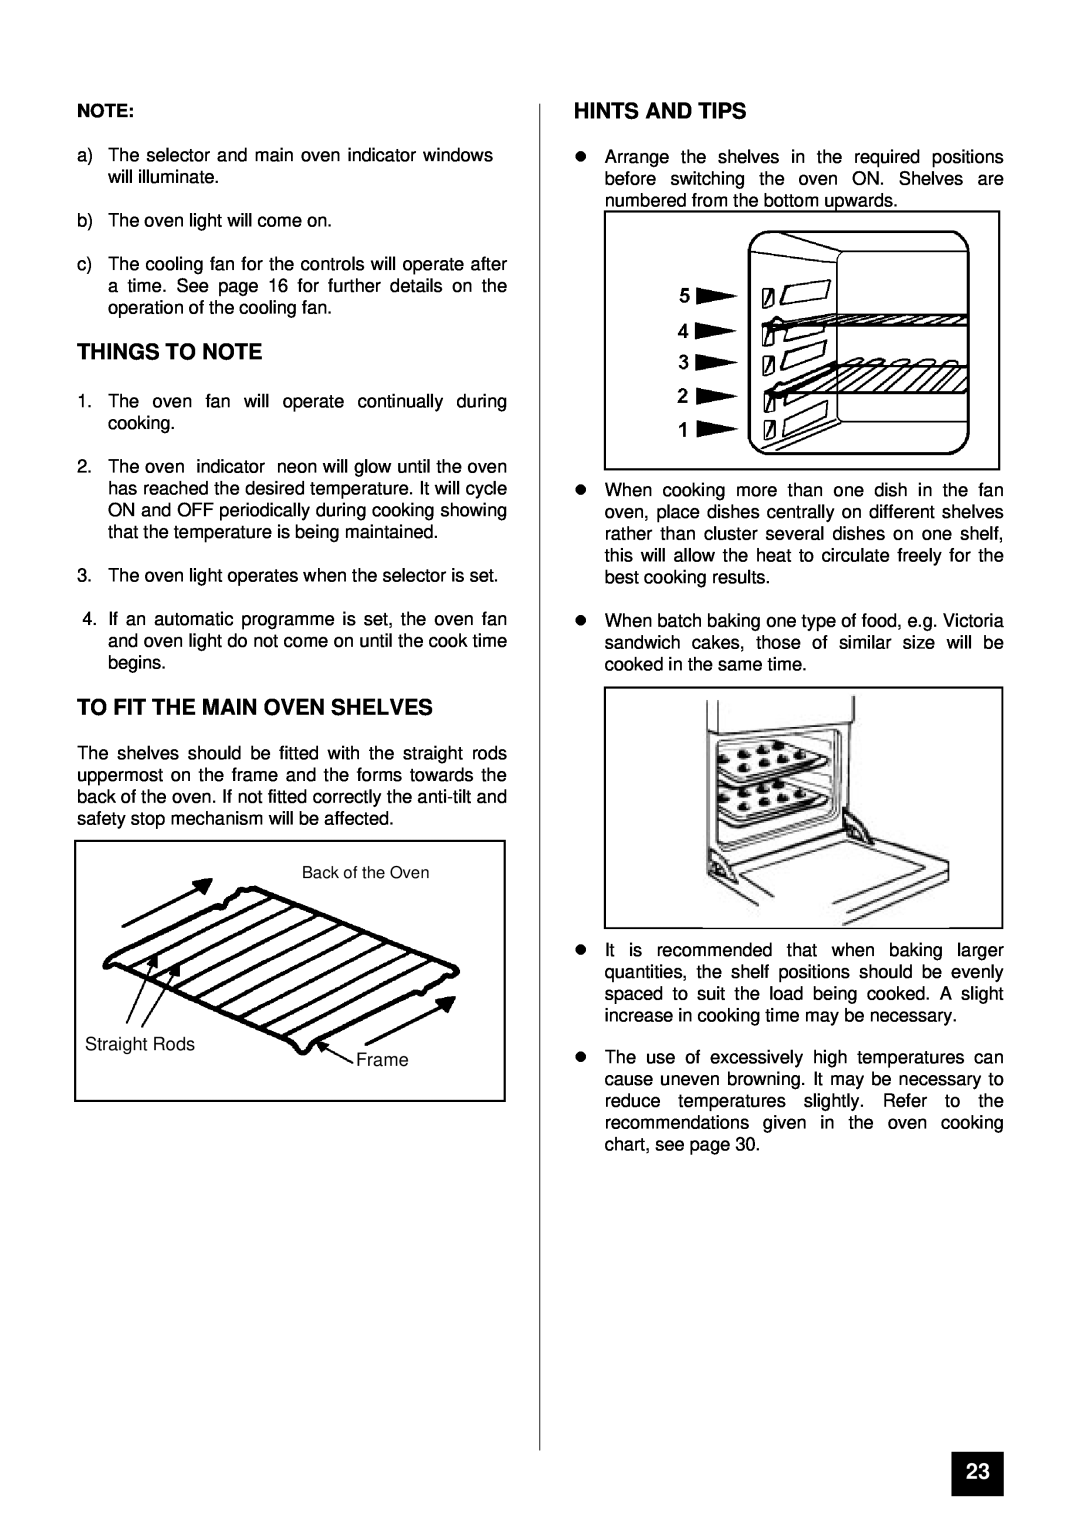 Tricity Bendix BD 921 installation instructions To Fit The Main Oven Shelves, Things To Note, lHINTS AND TIPS 